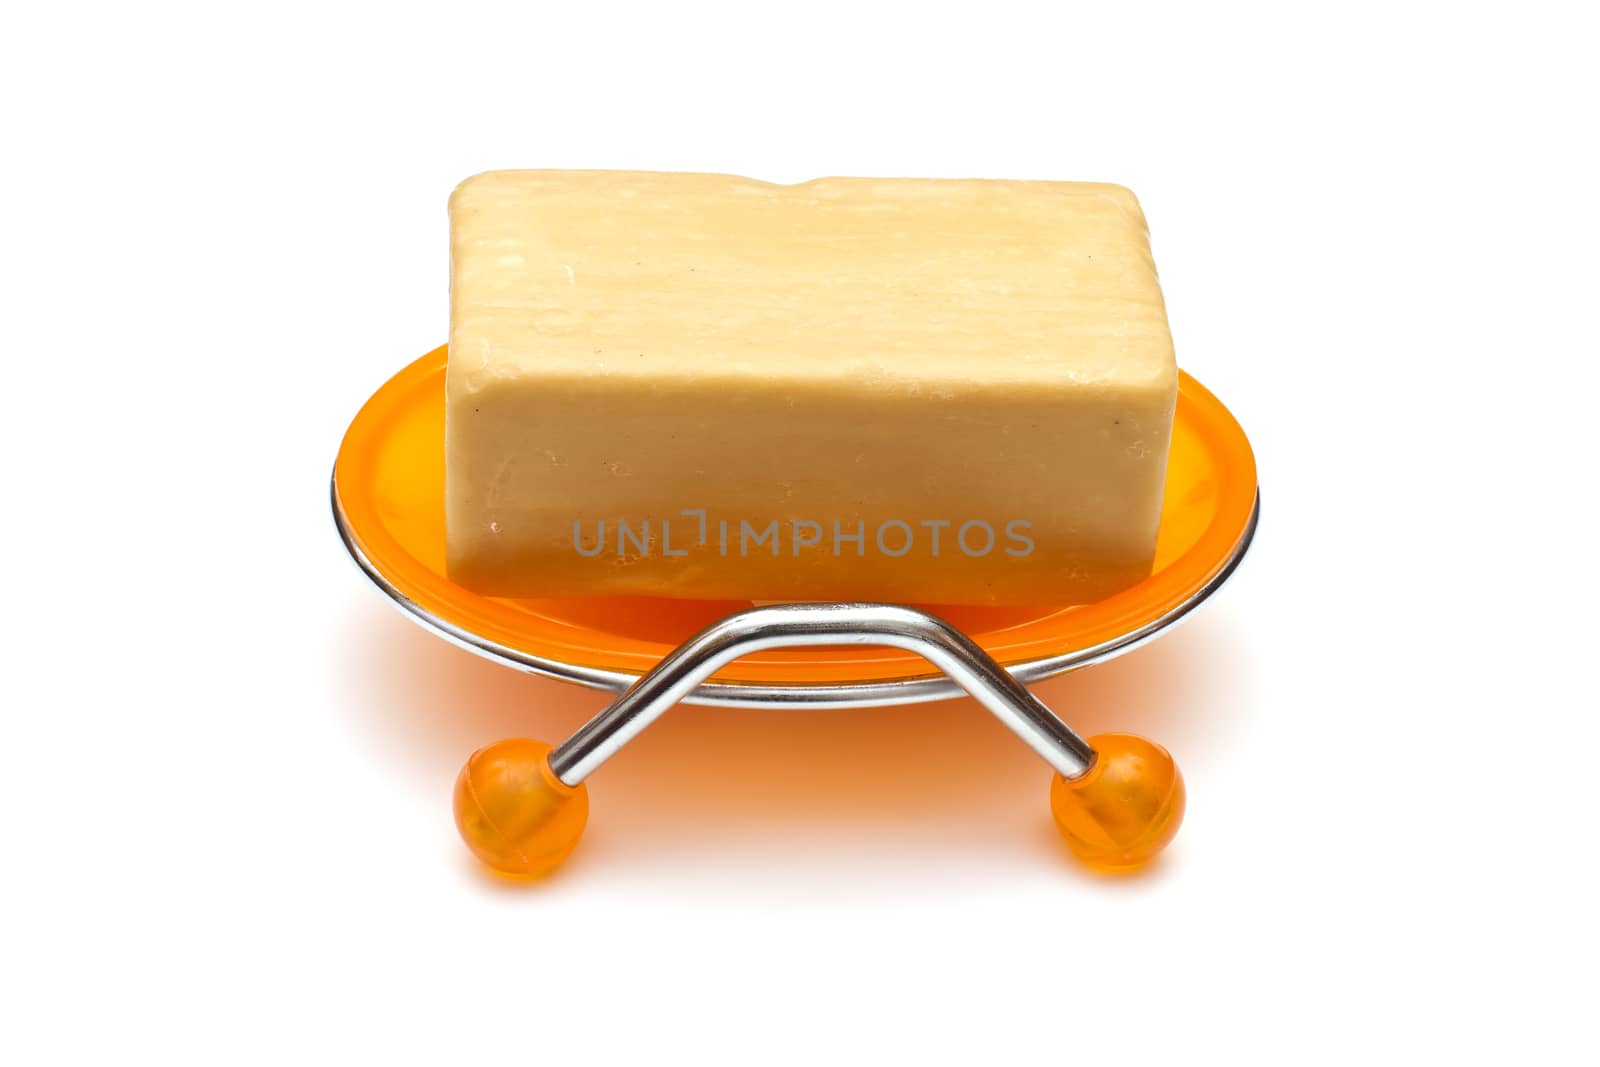 Soap in soap-dish, isolated